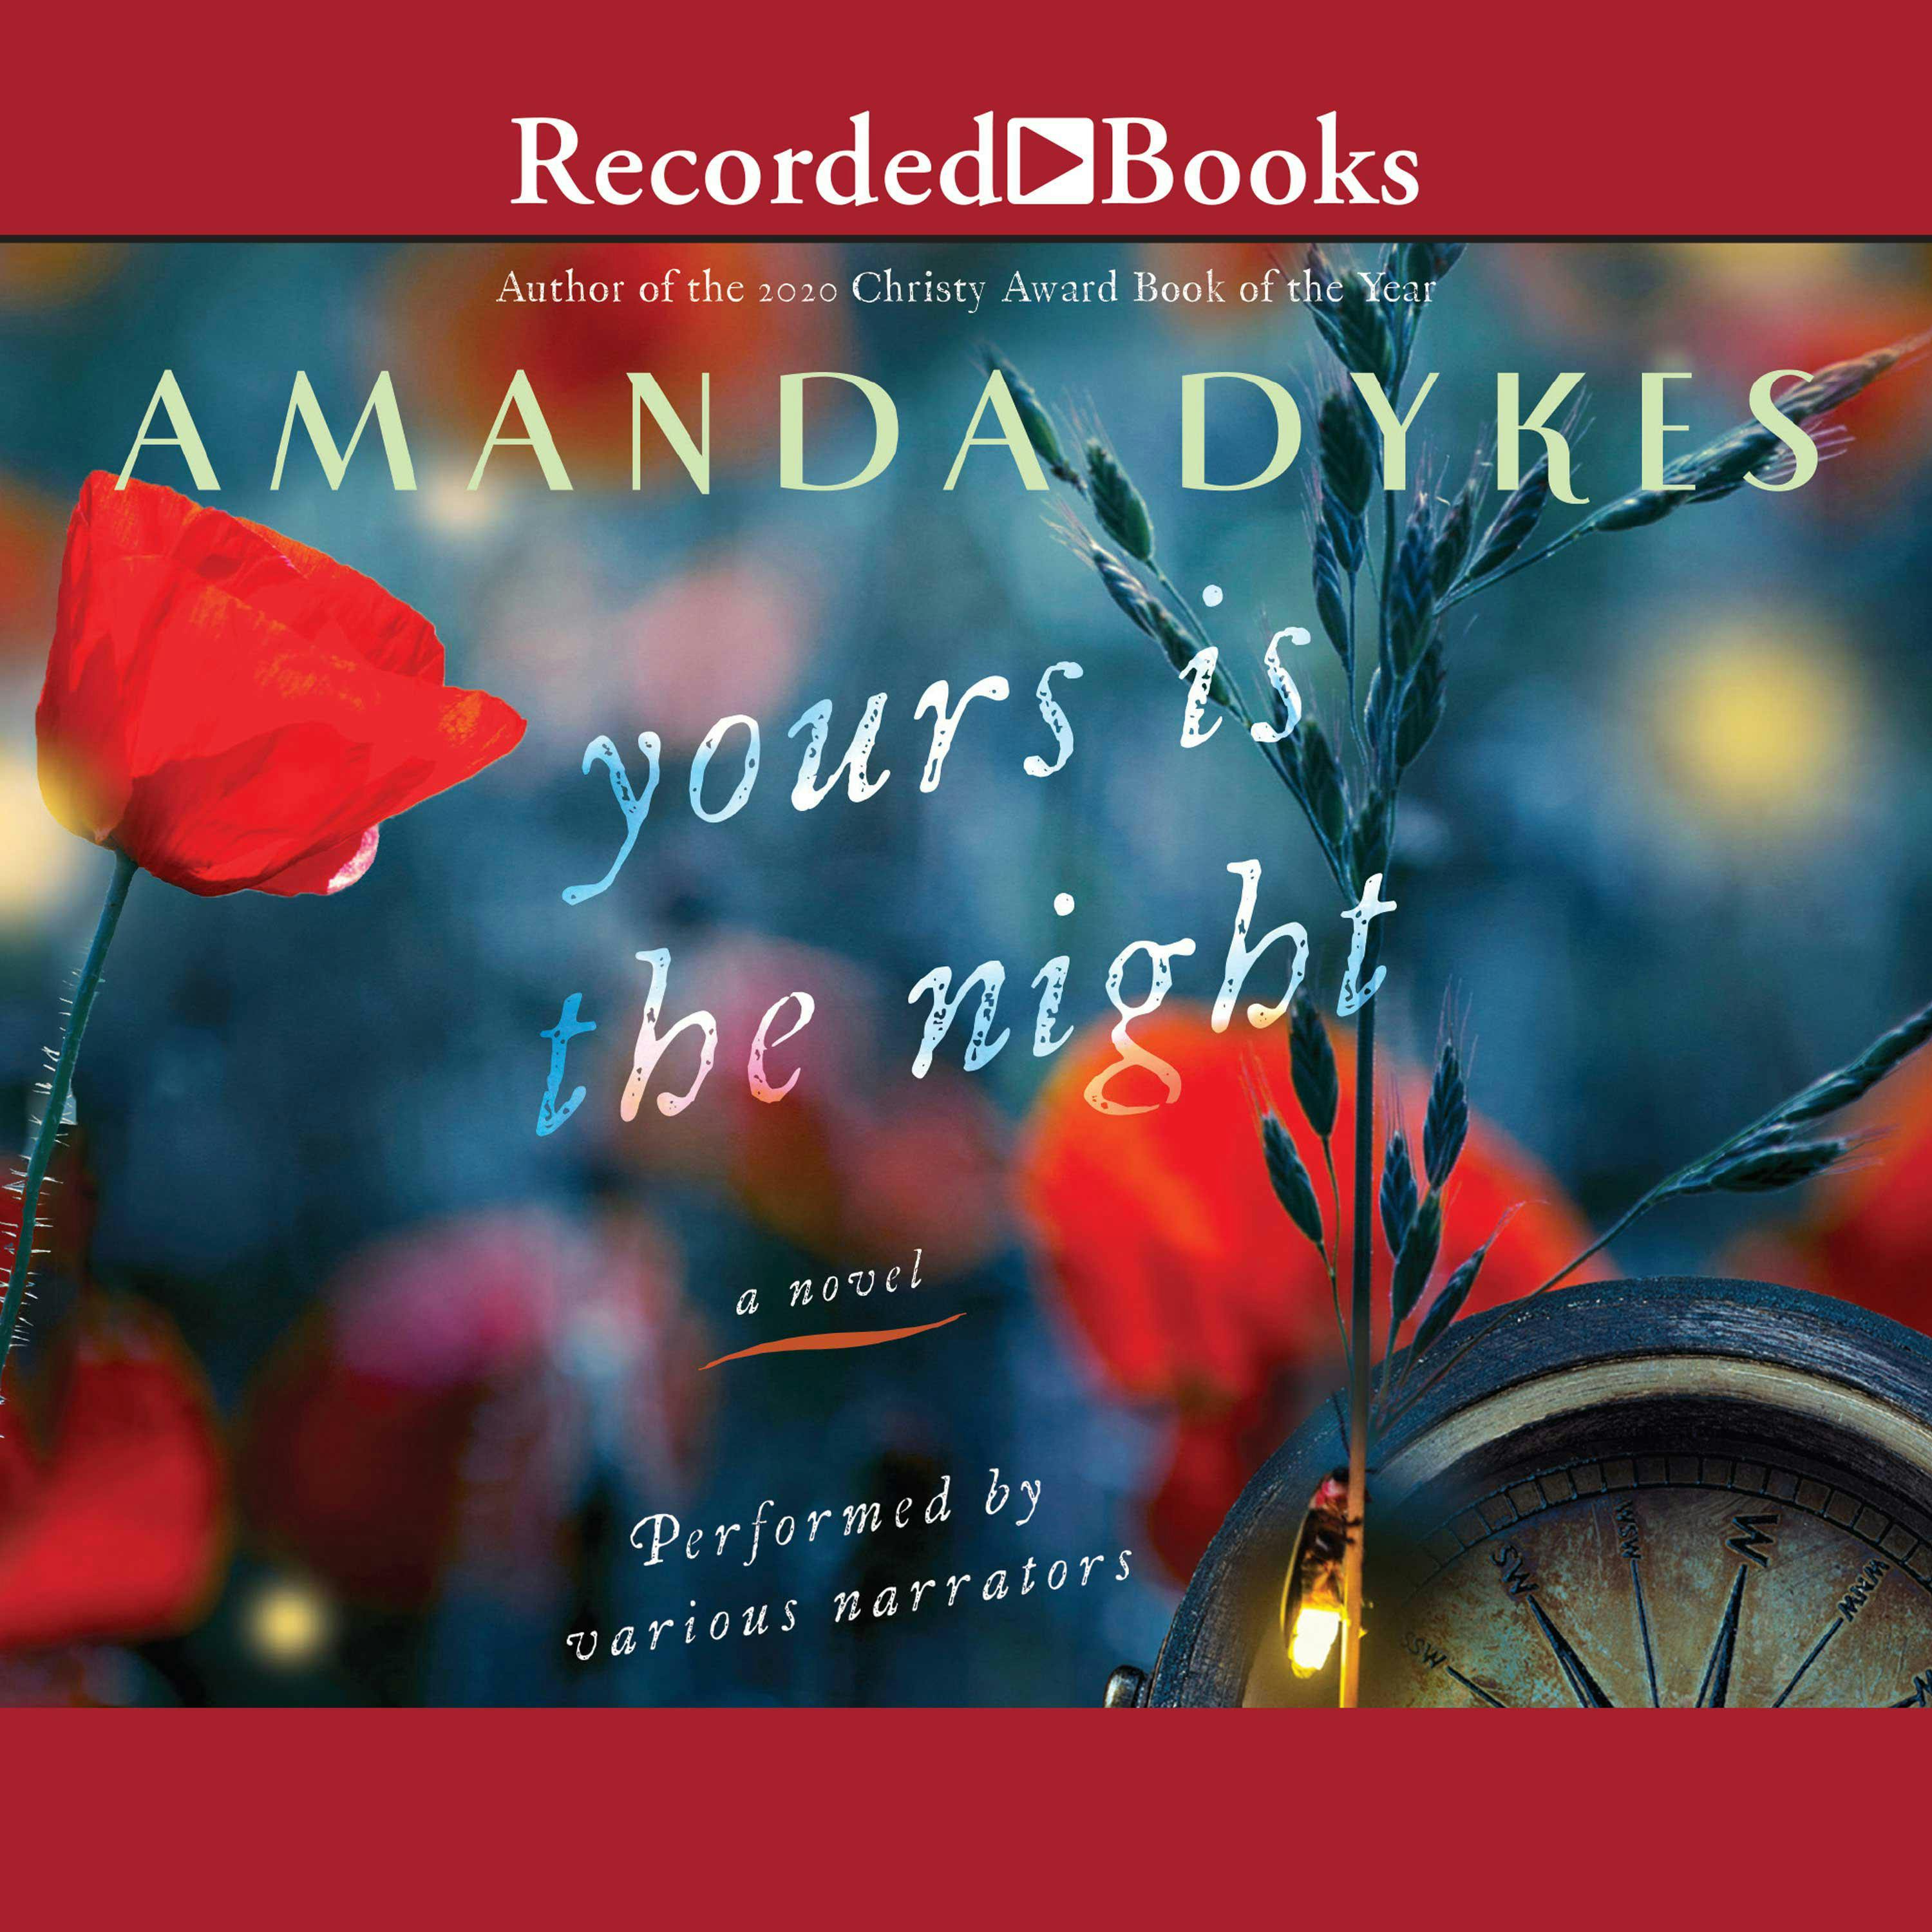 Yours Is the Night - Amanda Dykes